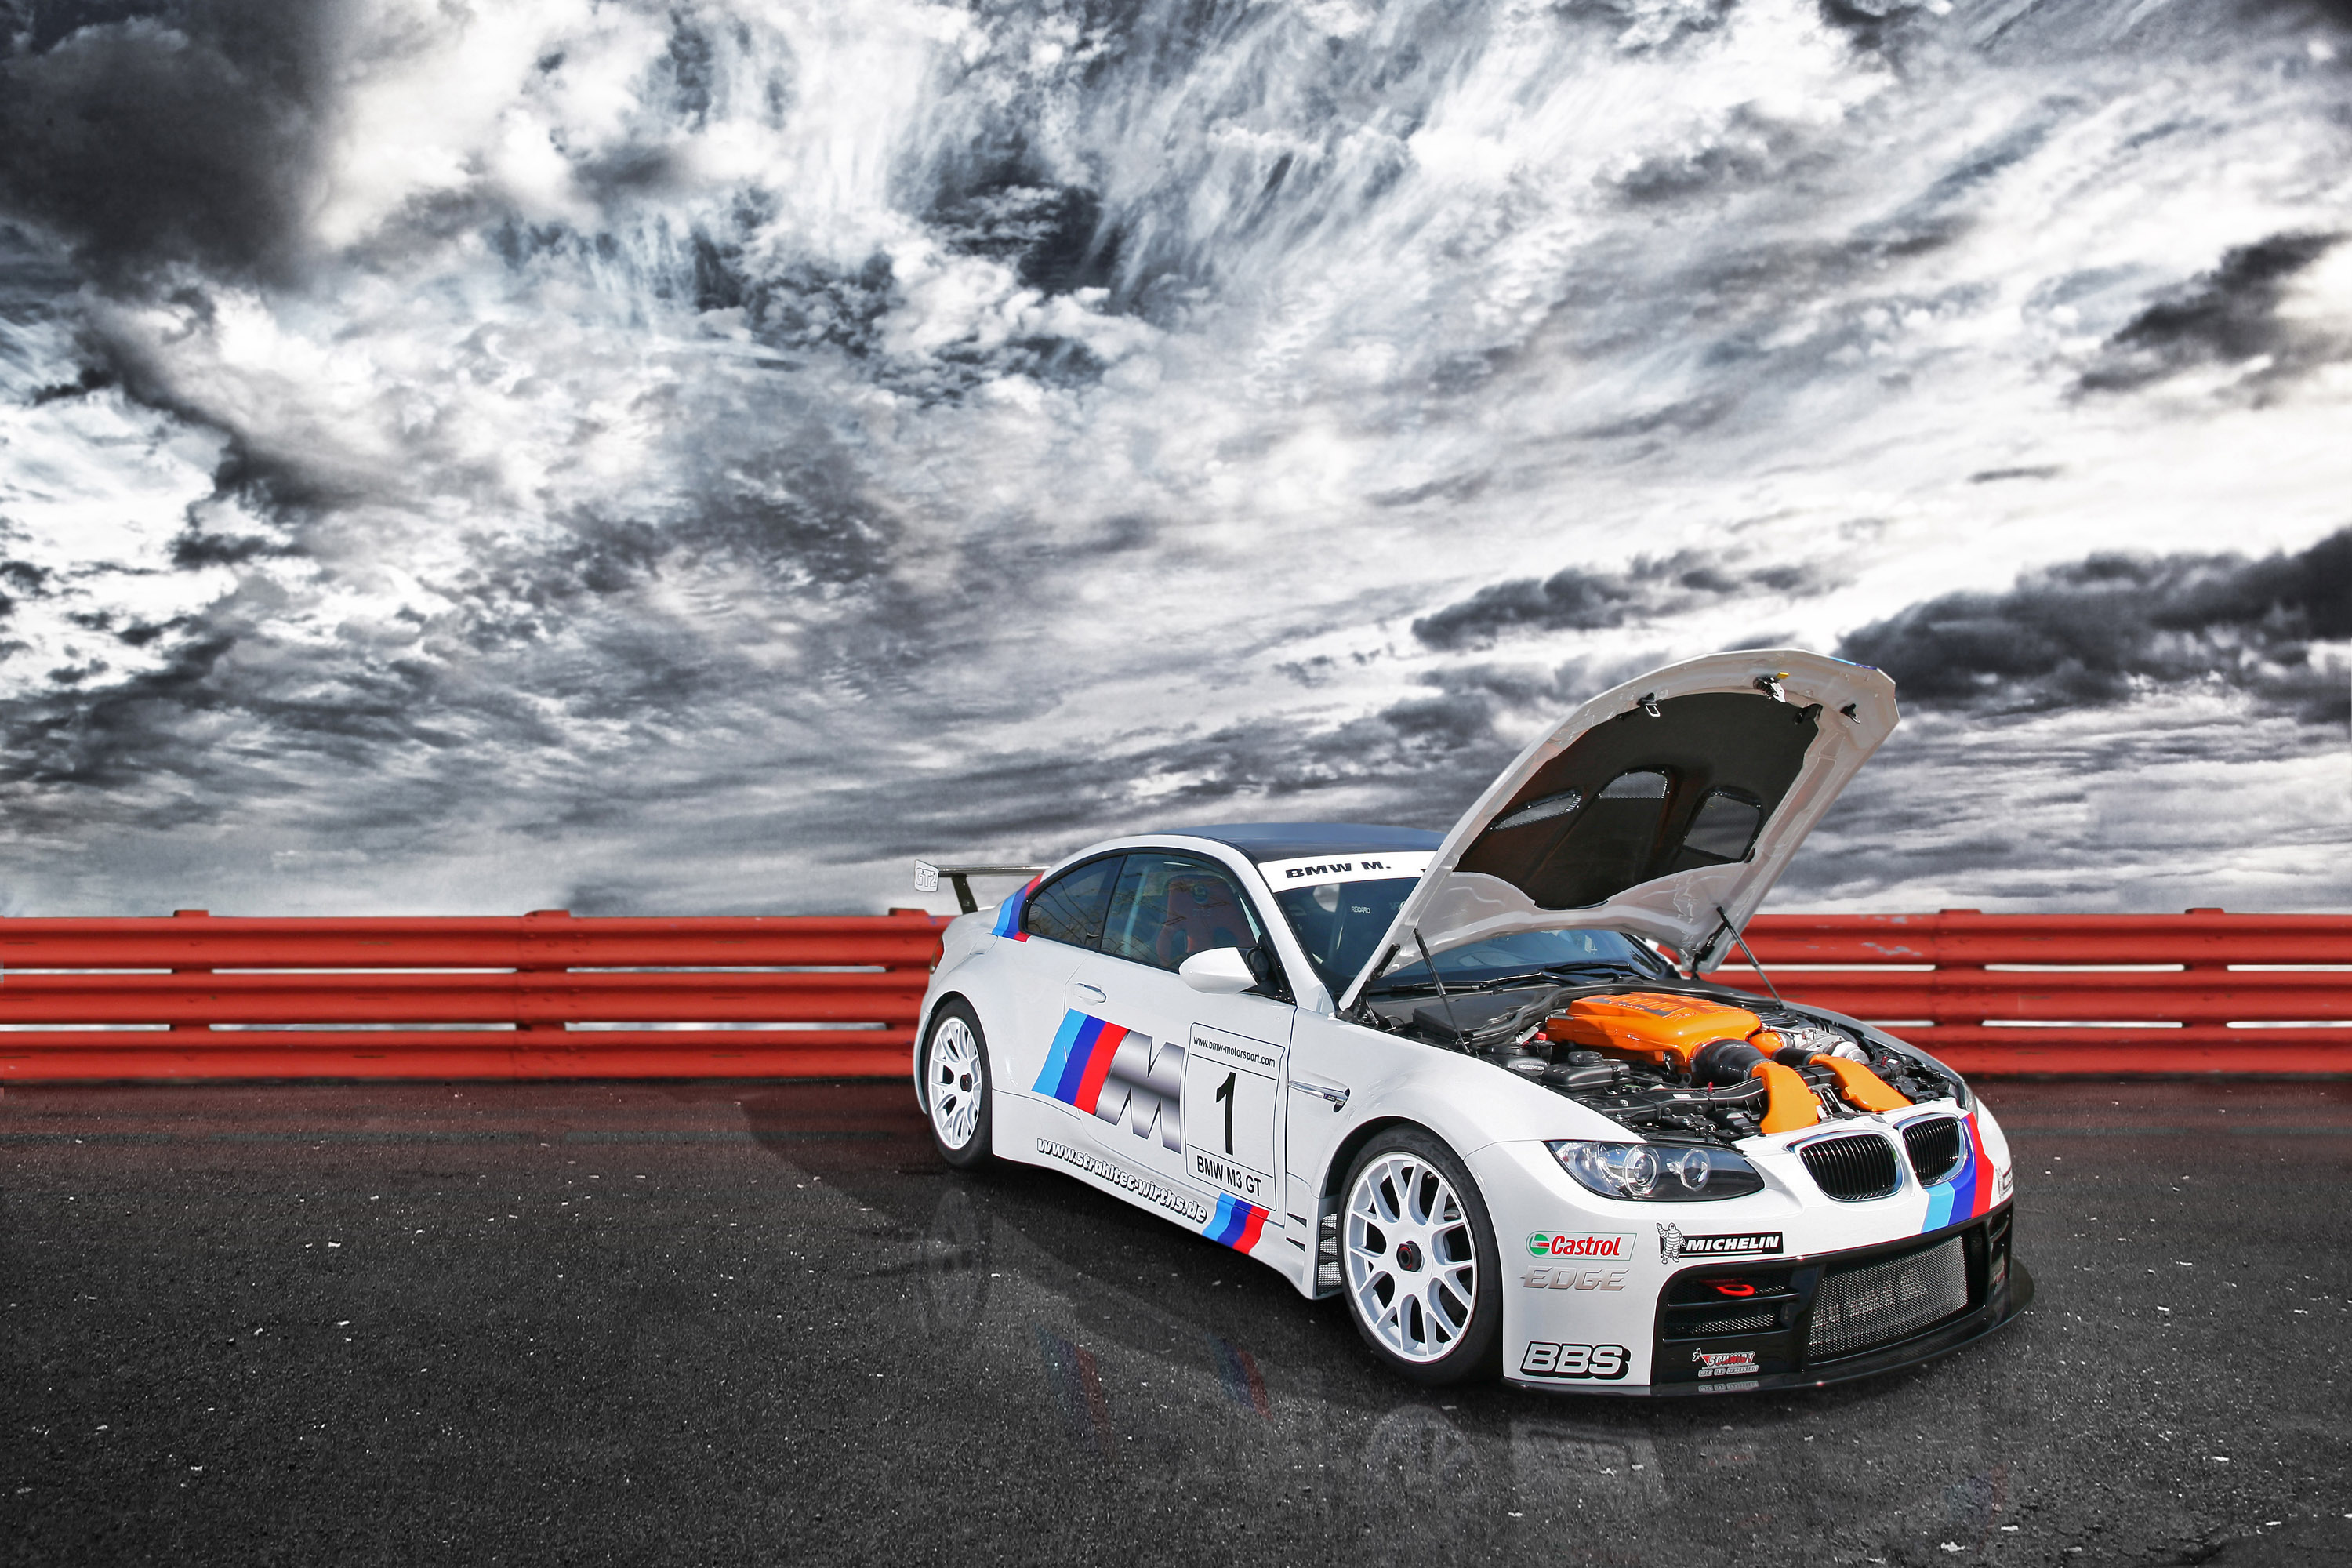 2011, Clp, Bmw, M 3, G t, Race, Racing, Engine, Engines Wallpaper